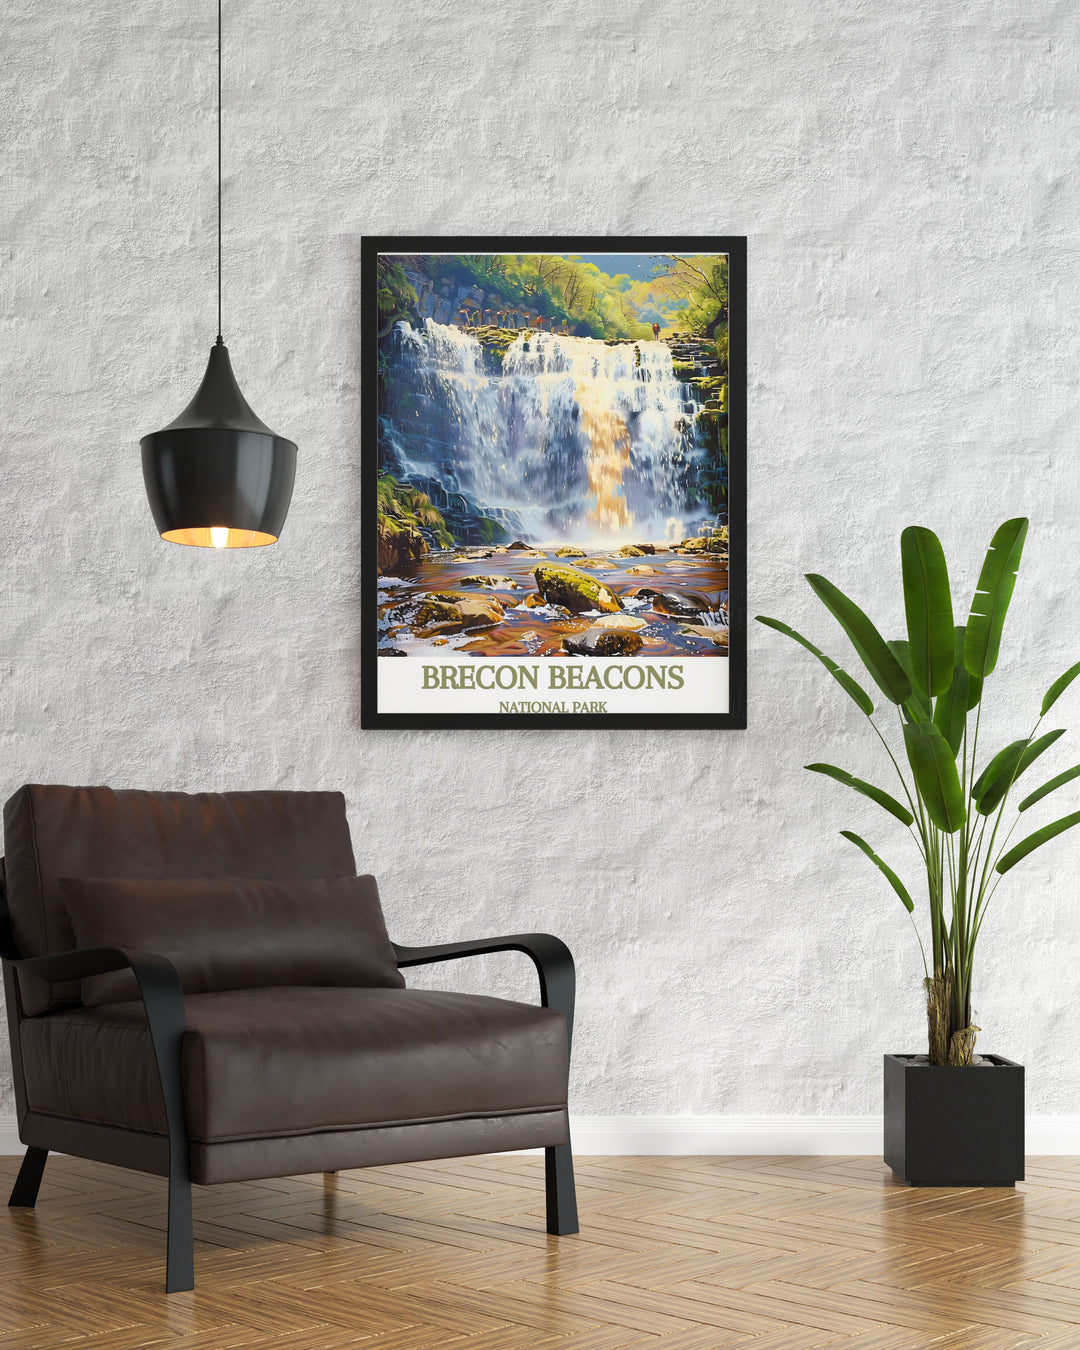 Captivating print of Sgwd yr Eira in the Brecon Beacons, offering a glimpse into the stunning natural landscapes of South Wales. This artwork highlights the tranquil beauty of the waterfall, surrounded by lush foliage, making it a striking addition to your decor.